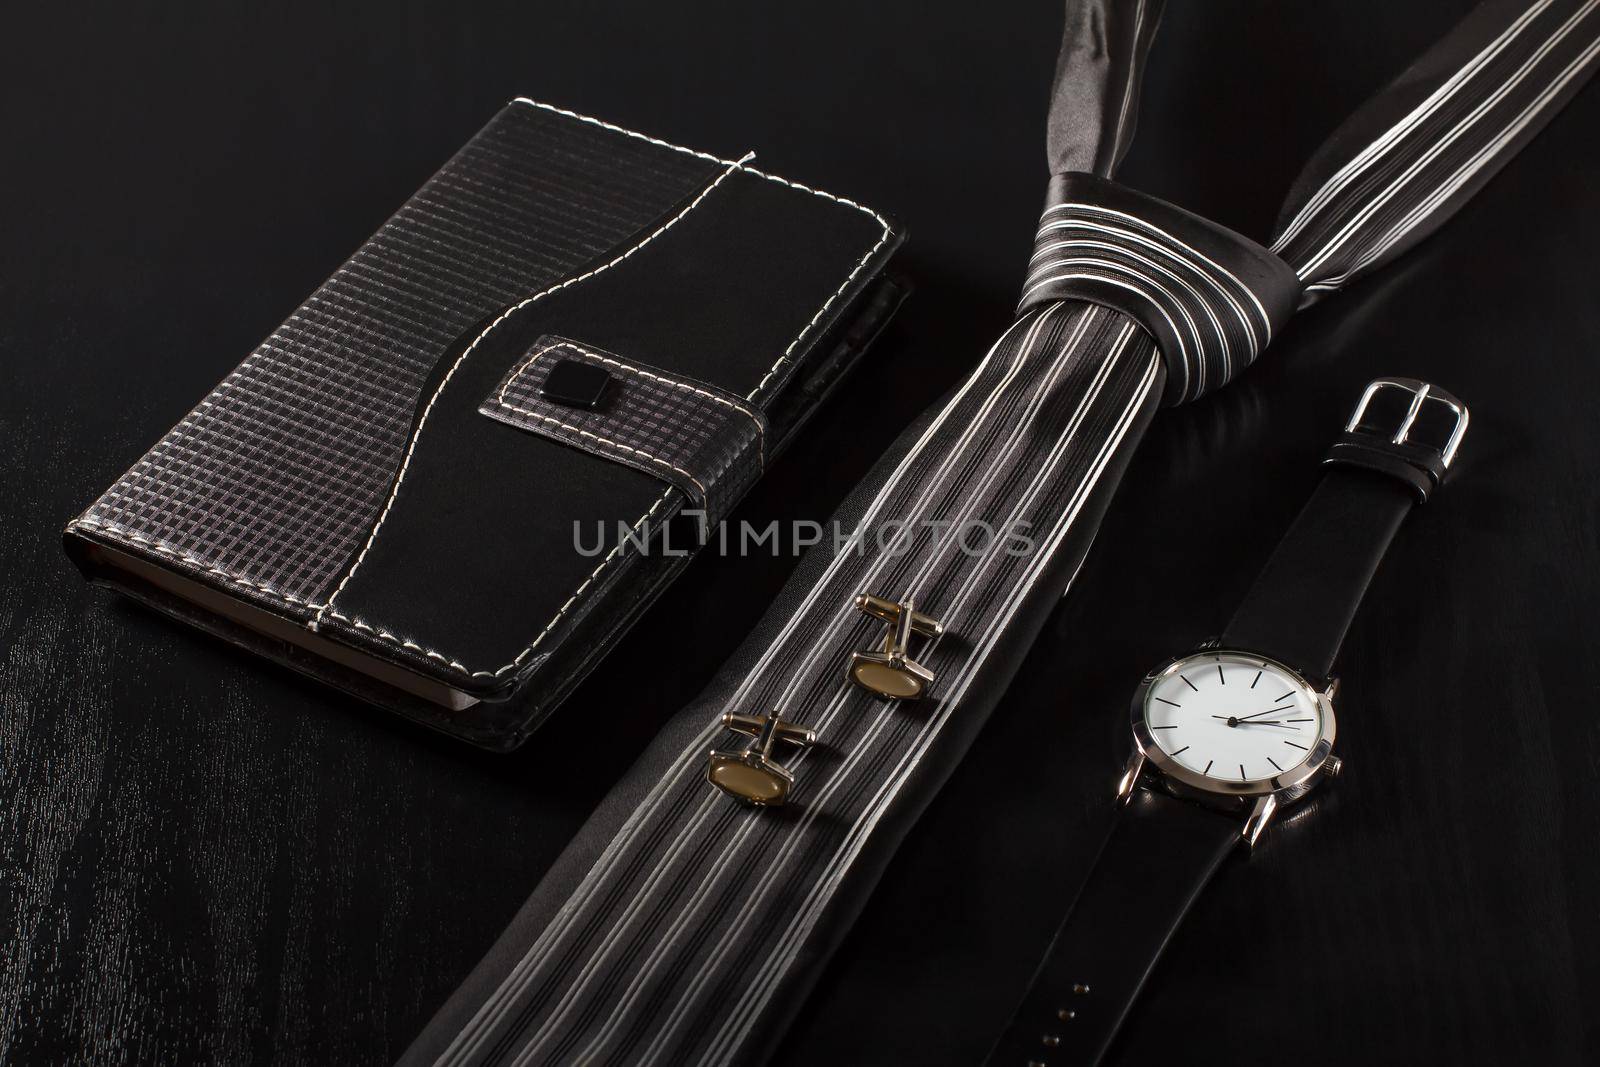 Notebook in leather cover, tie, cufflinks, watch with a leather strap on a black background